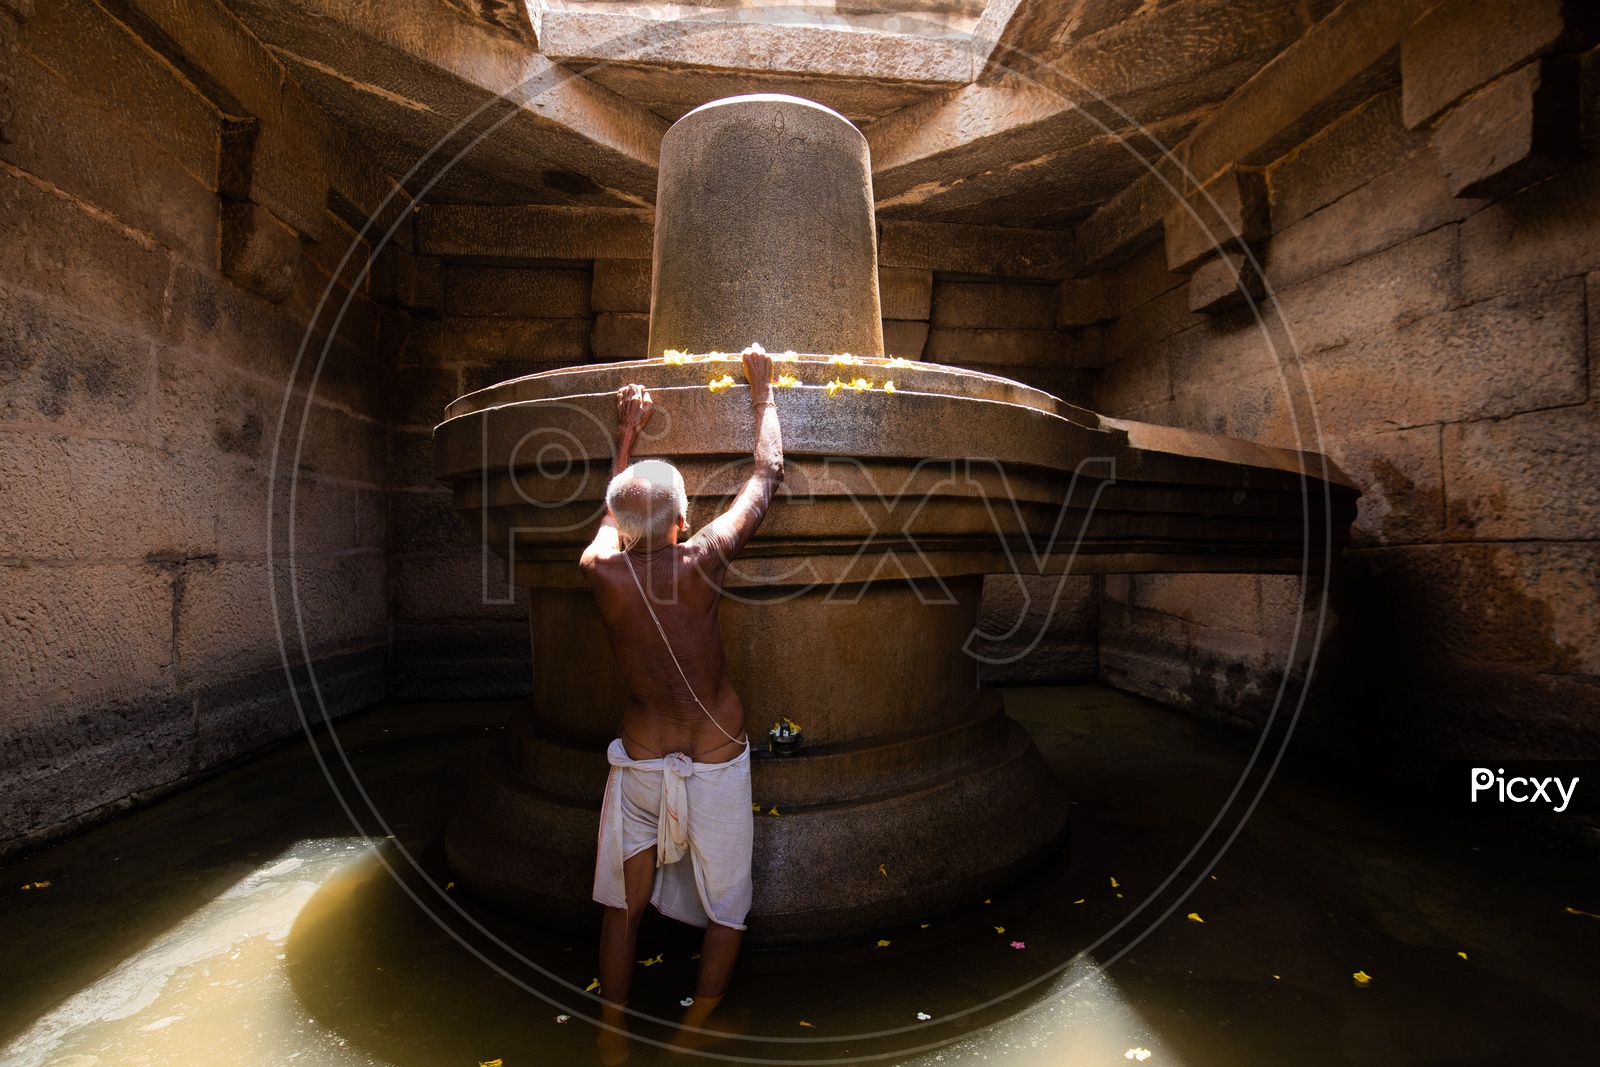 A Priest  Performing  Pooja For the Badavi Linga Statue  Surrounded By  A Pool Of Water In An Ancient Temple In Hampi